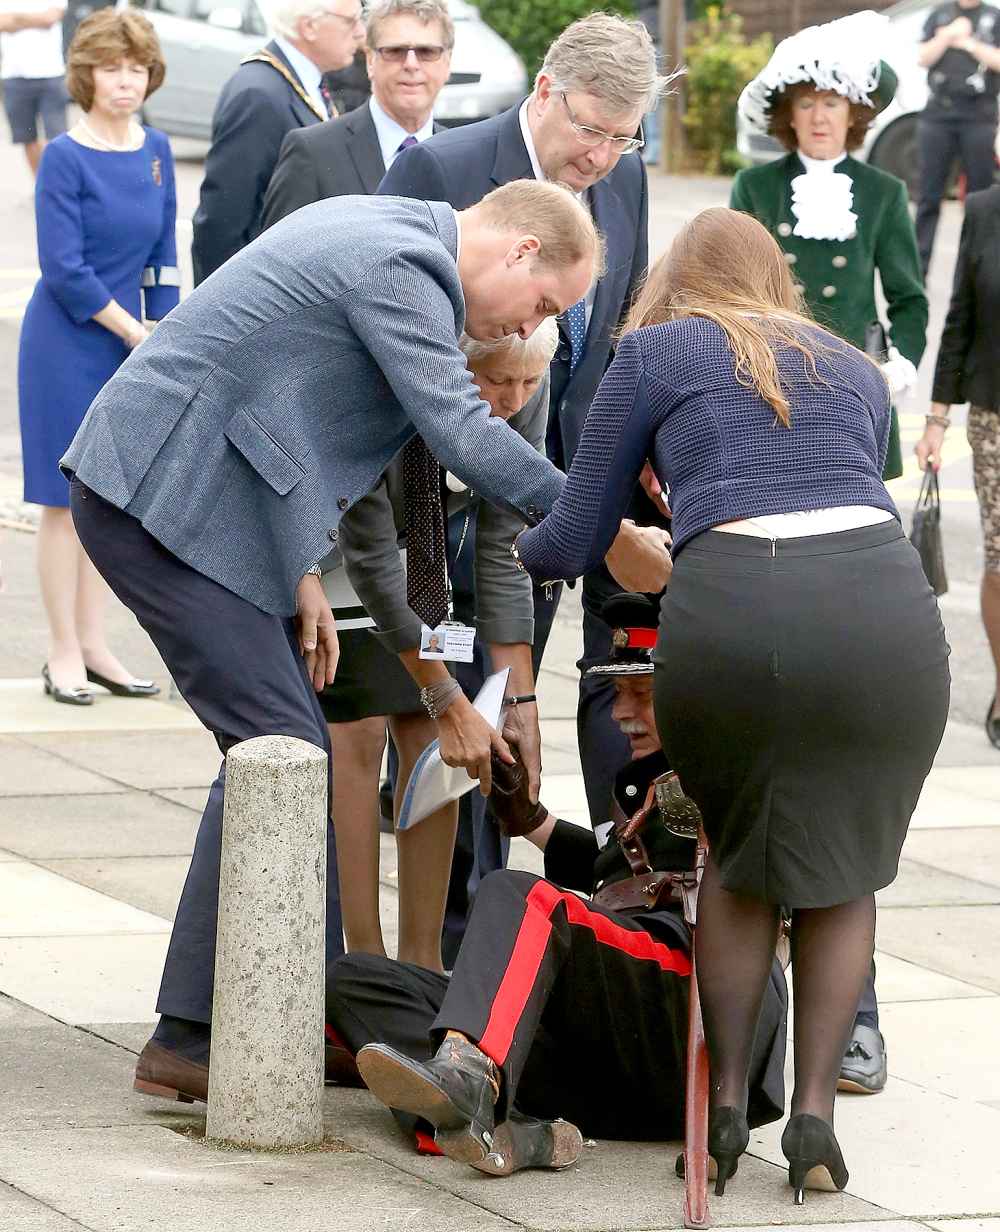 Prince William, Duke of Cambridge rushes to help Vice Lord Lieutenant of Essex Jonathon Douglas-Hughes who fell backwards over a bollard as they arrive at Steward's Academy on September 16, 2016 in Harlow, England.